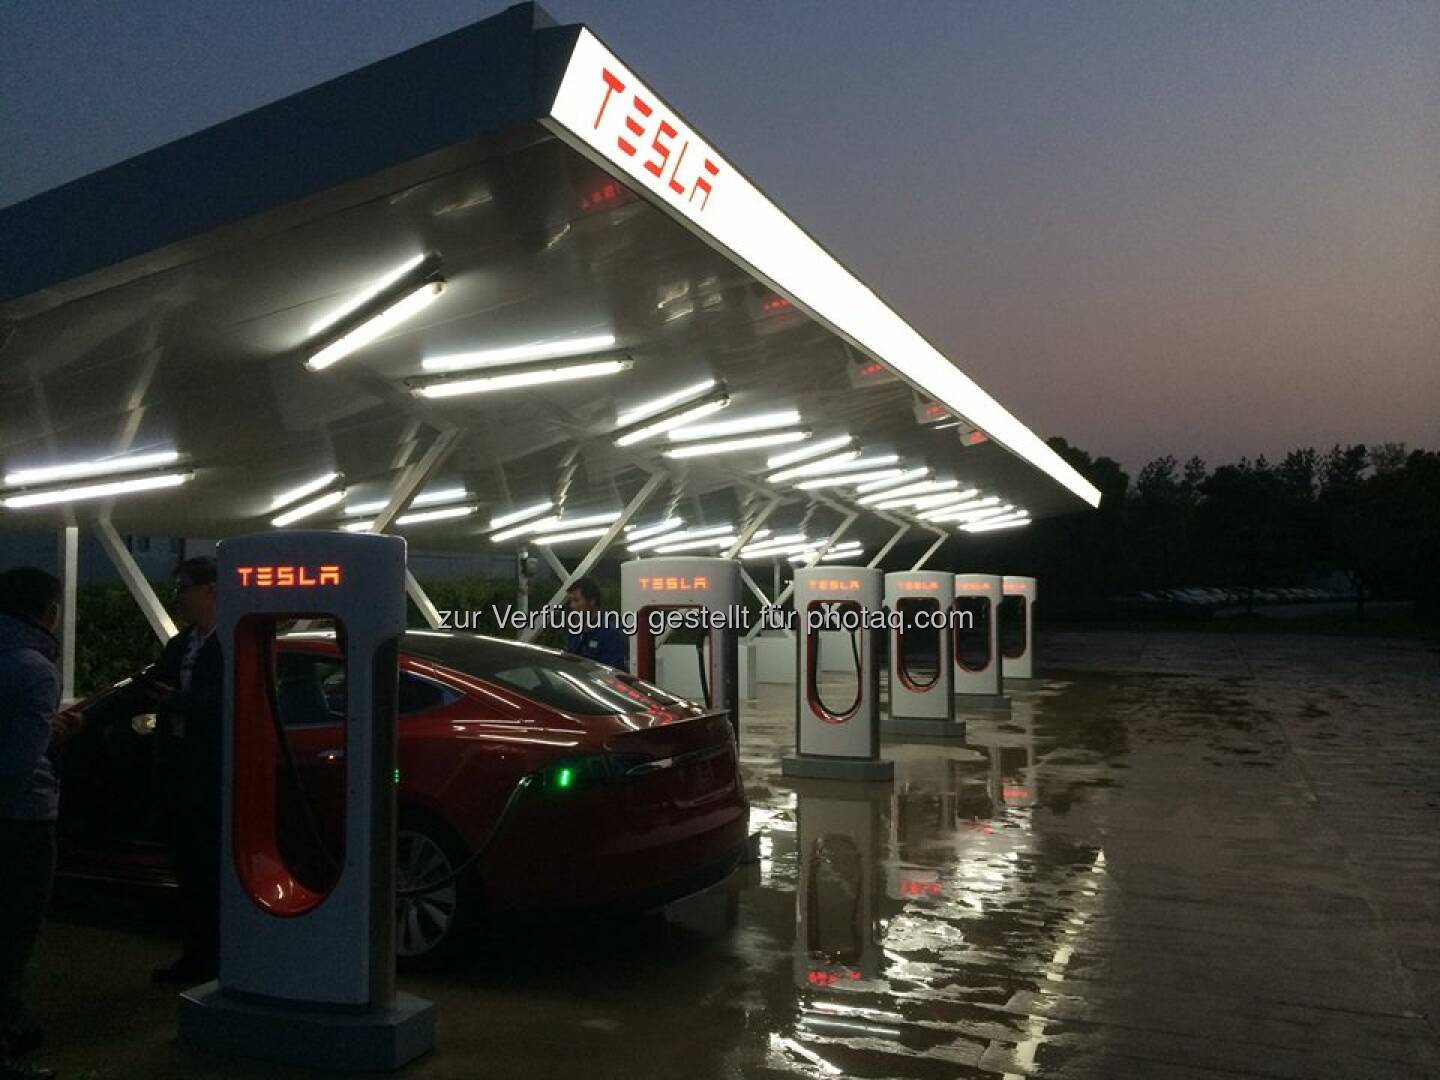 Tesla: China is charged! This week we switched on our first Superchargers in China.  Source: http://facebook.com/teslamotors